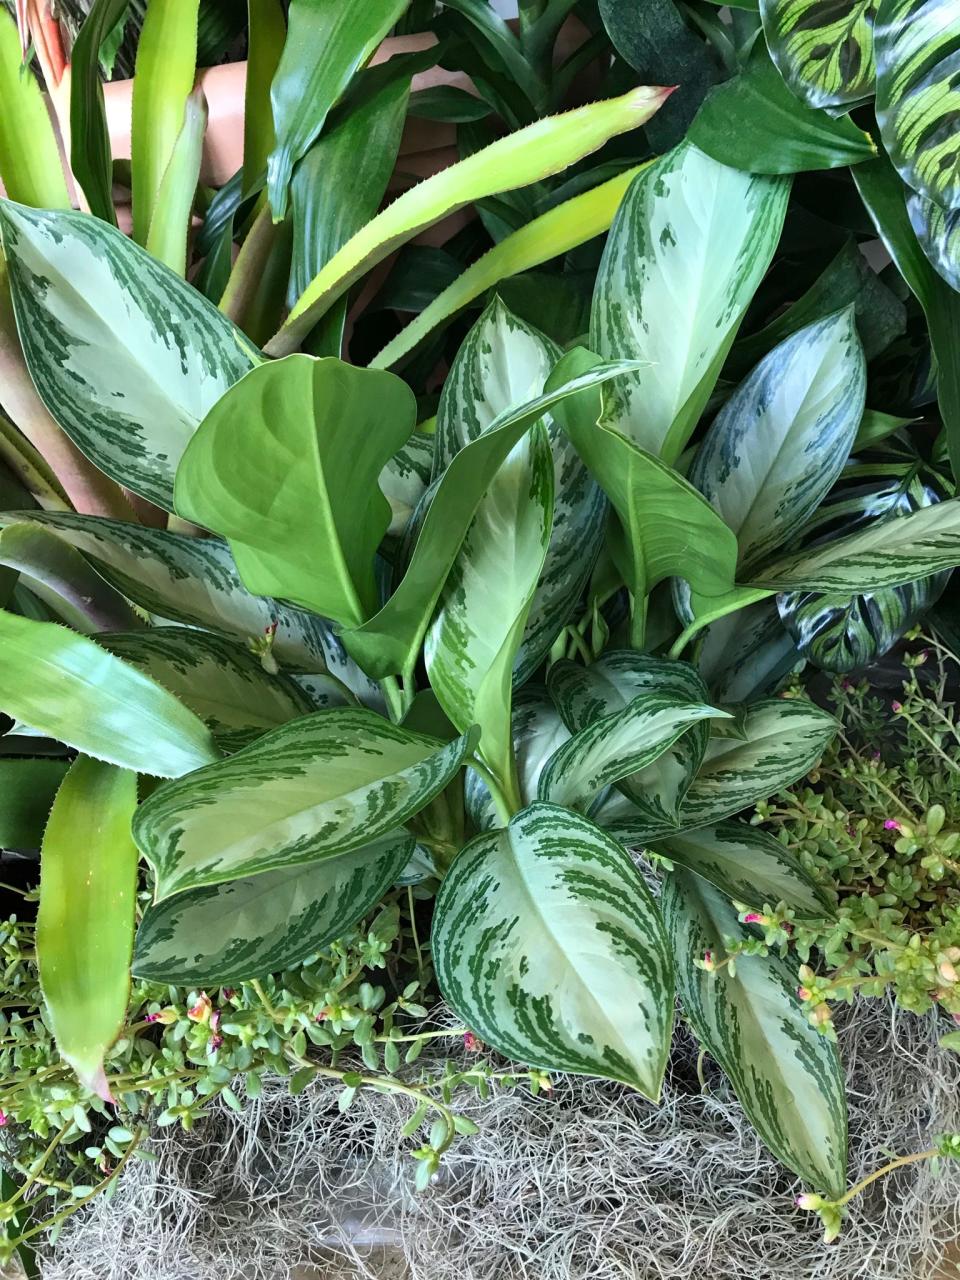 Plants that survive in low light are hard to find, but silver queen aglaonema checks this box.